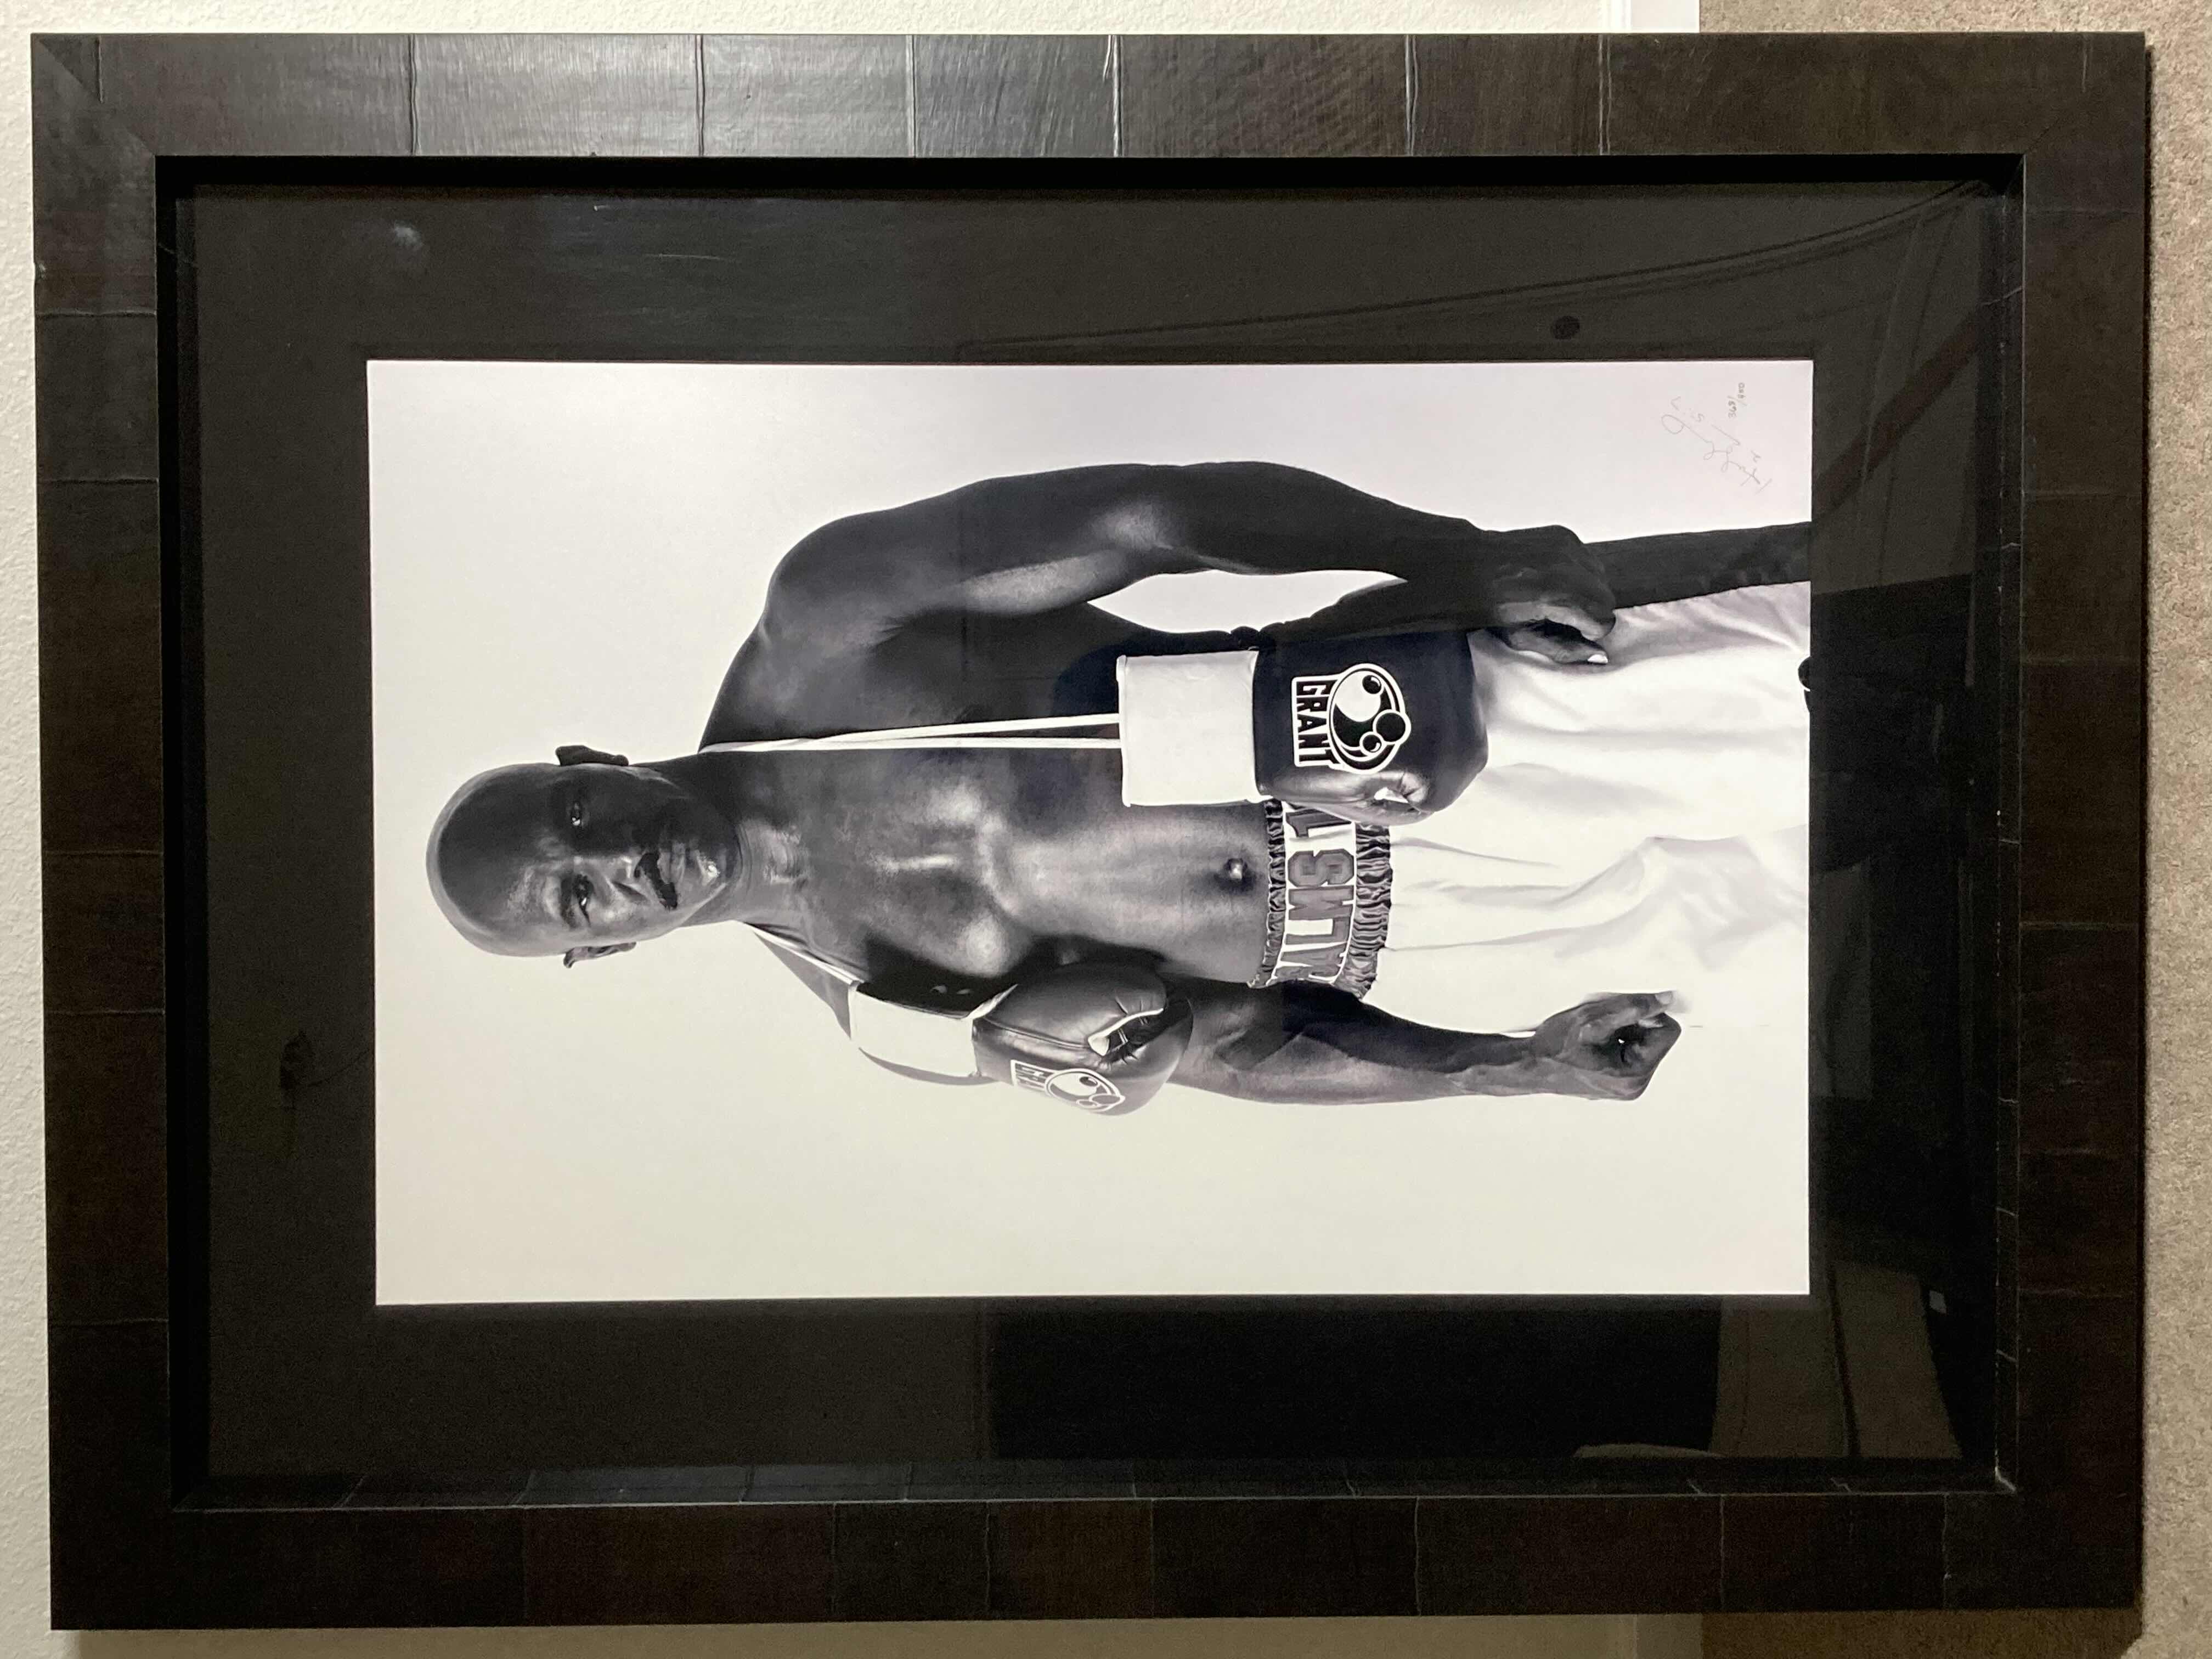 Photo 1 of EVANDER HOLYFIELD PHOTOGRAPHED BY PETER LIK AUTOGRAPHED BY EVANDER HOLYFIELD 368/450 41” X 2.75” H54.5”